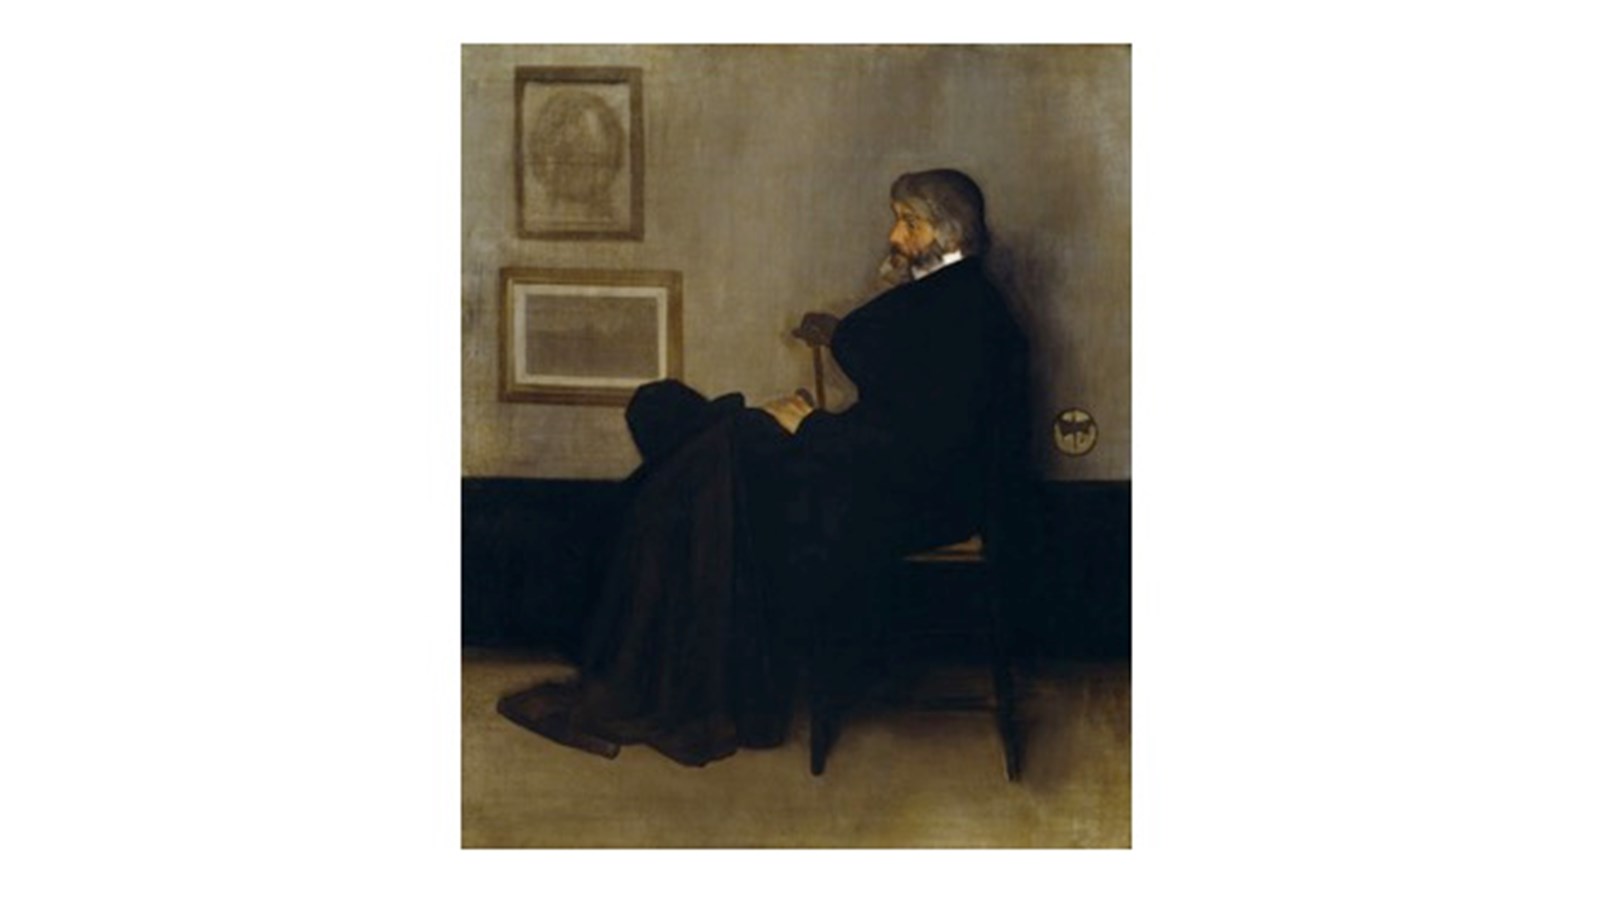 a dark portrait of a person looking off to the left in a dull room.